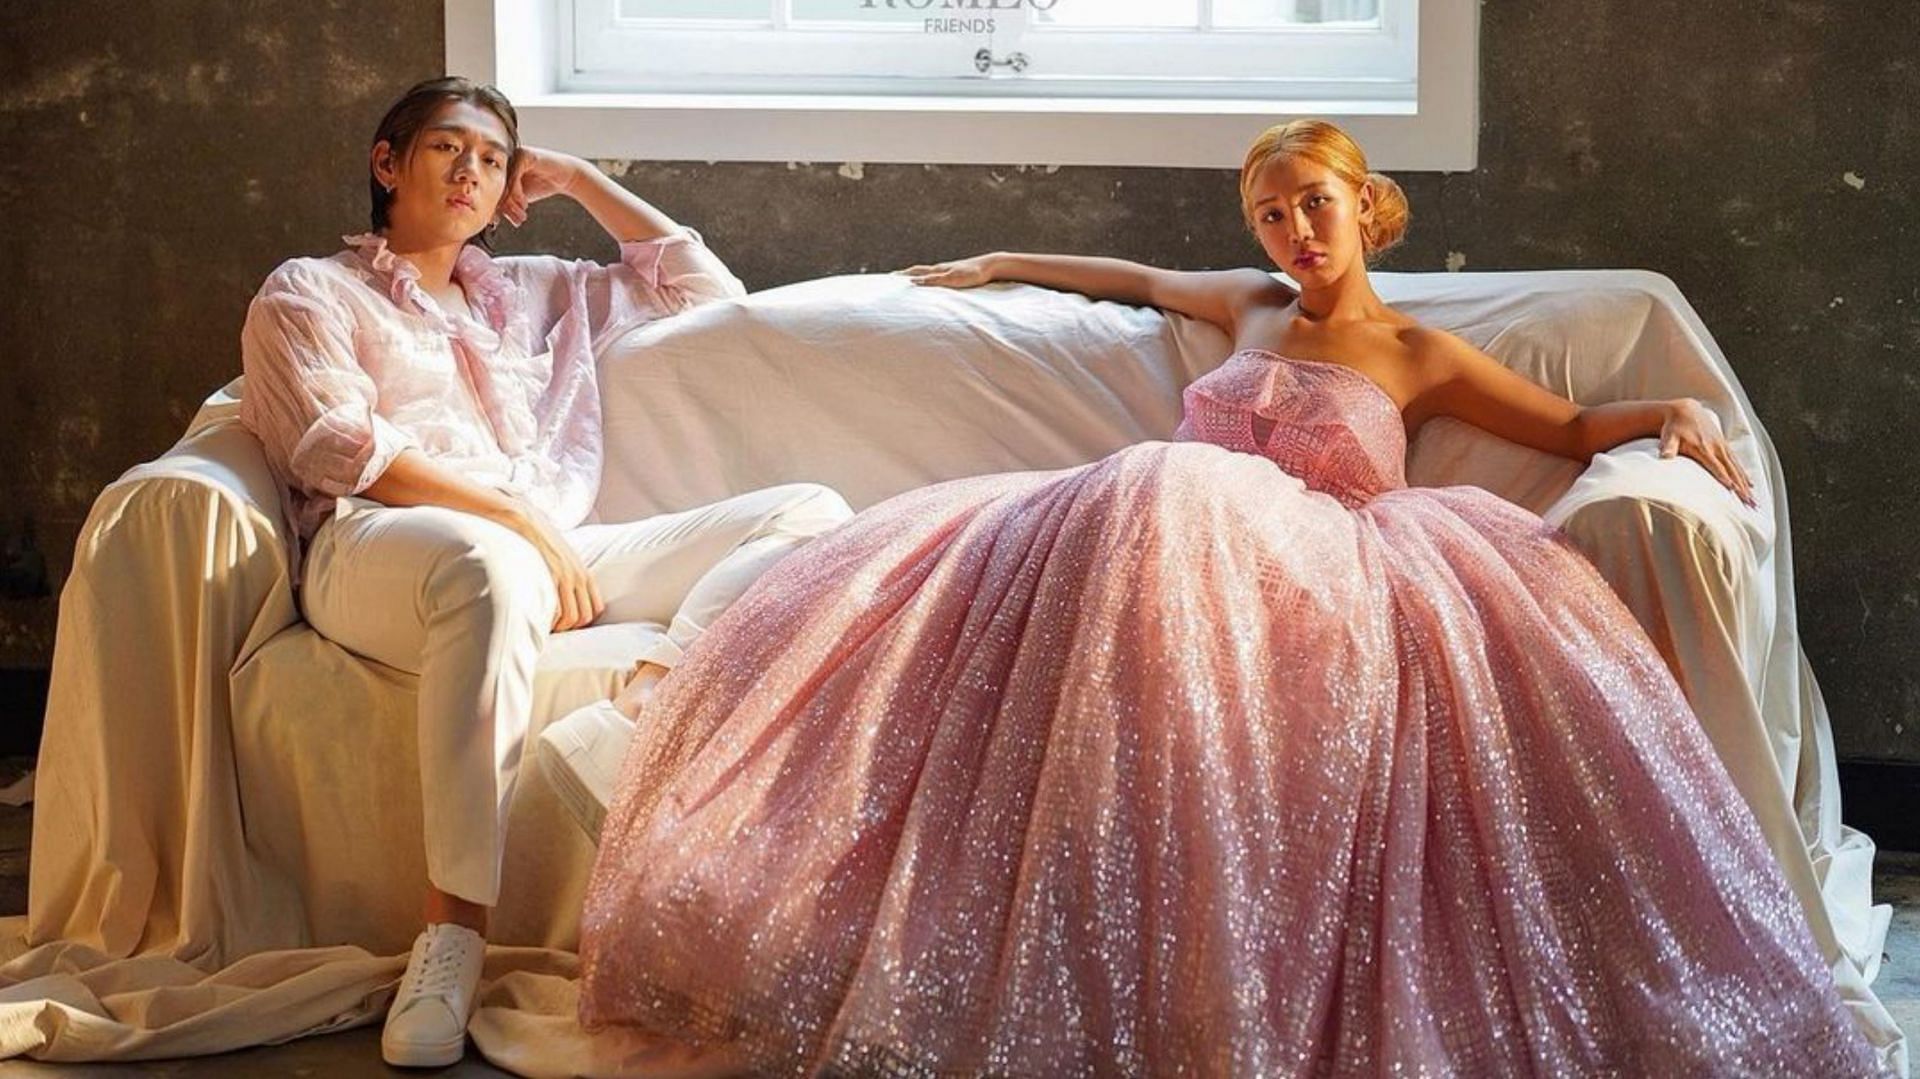 Truedy&#039;s stunning pink gown also received a number of compliments (Image via Instagram/truedy.js)